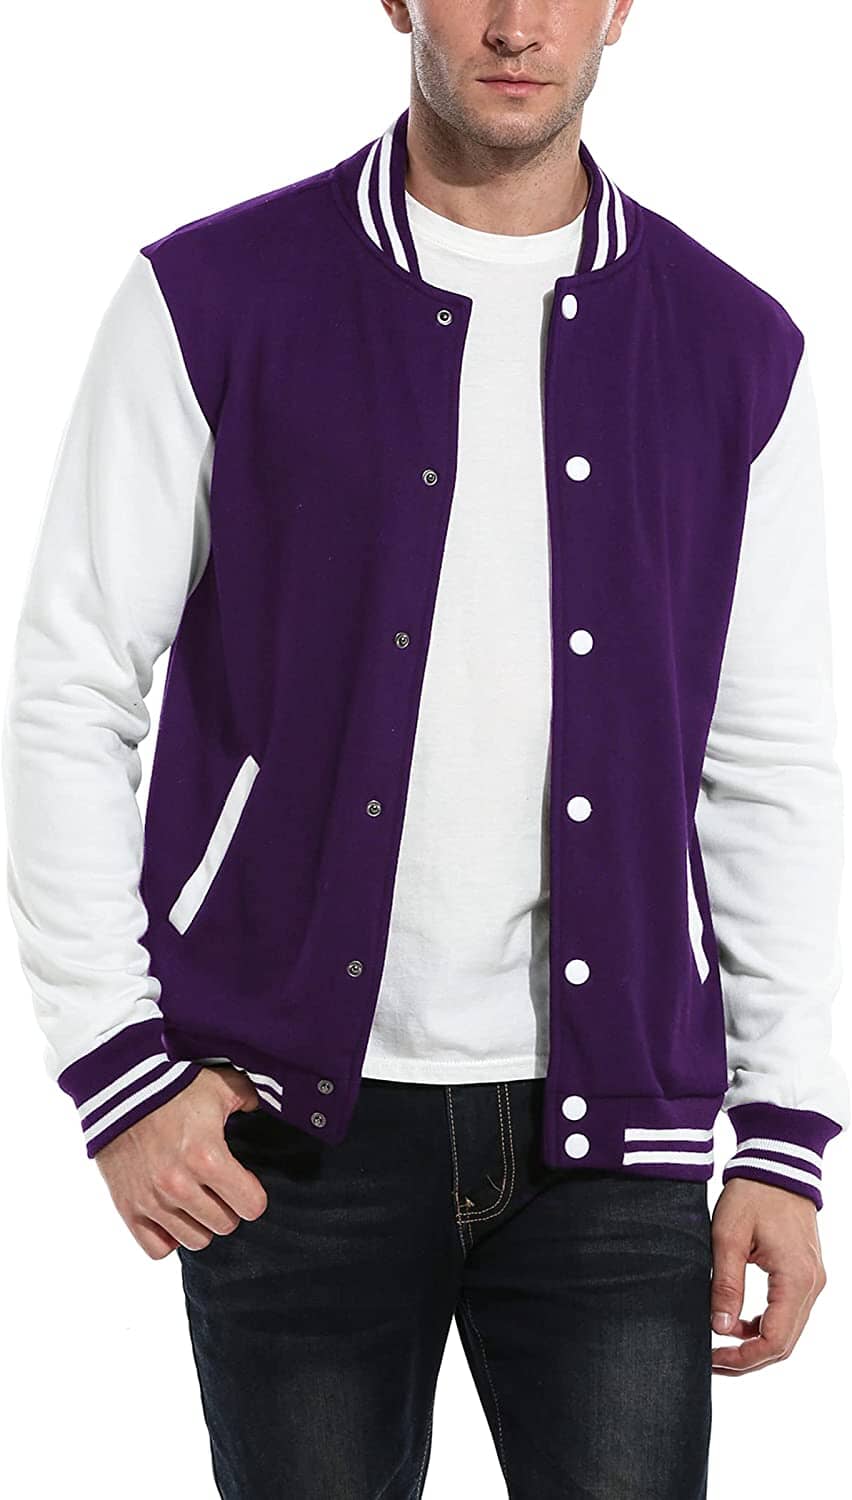 Fashion Varsity Cotton Bomber Jackets (US Only) Jackets COOFANDY Store Purple S 